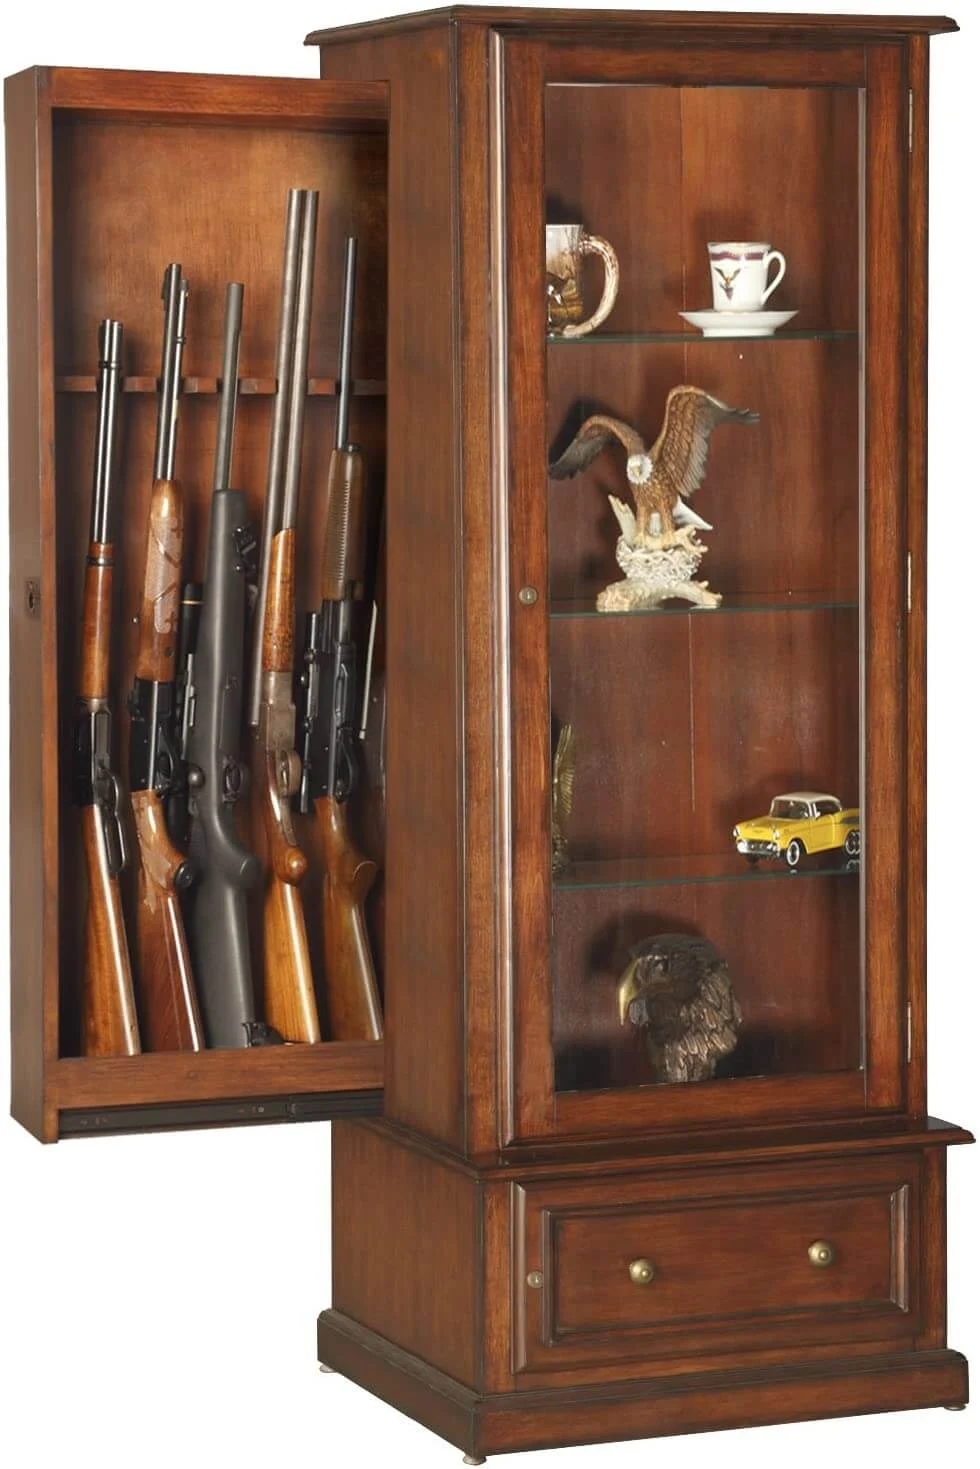 A wooden cabinet filled with guns and other items
